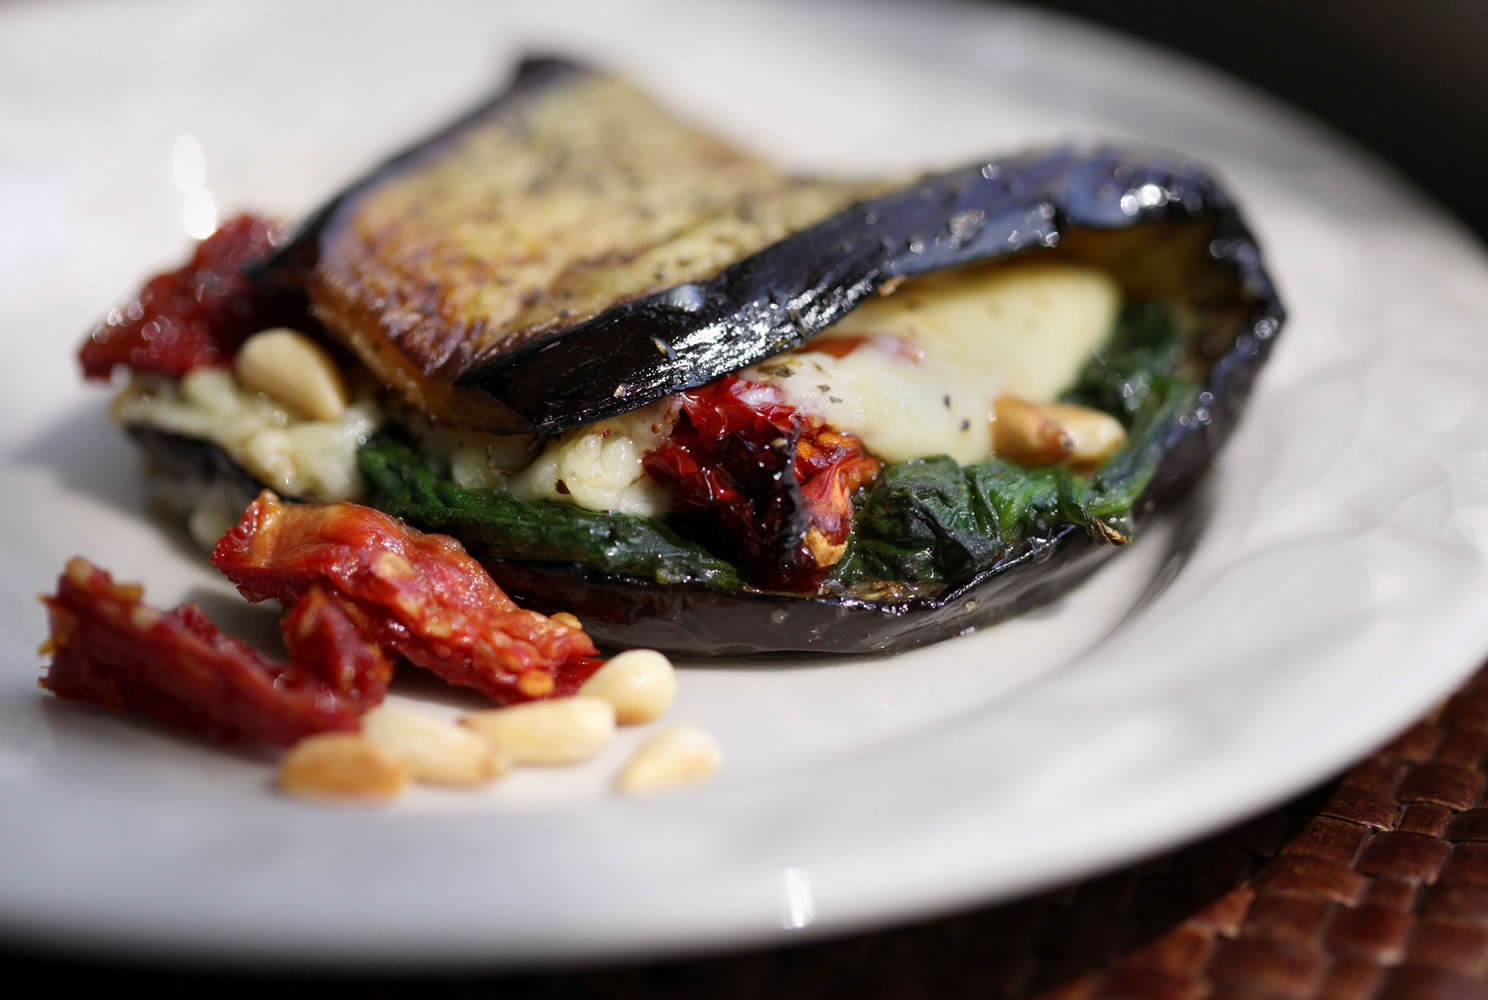 Fried eggplant slices can be made malleable and used to make a wrap with a stuffing of cheese, pine nuts, spinach and sun-dried tomatoes.